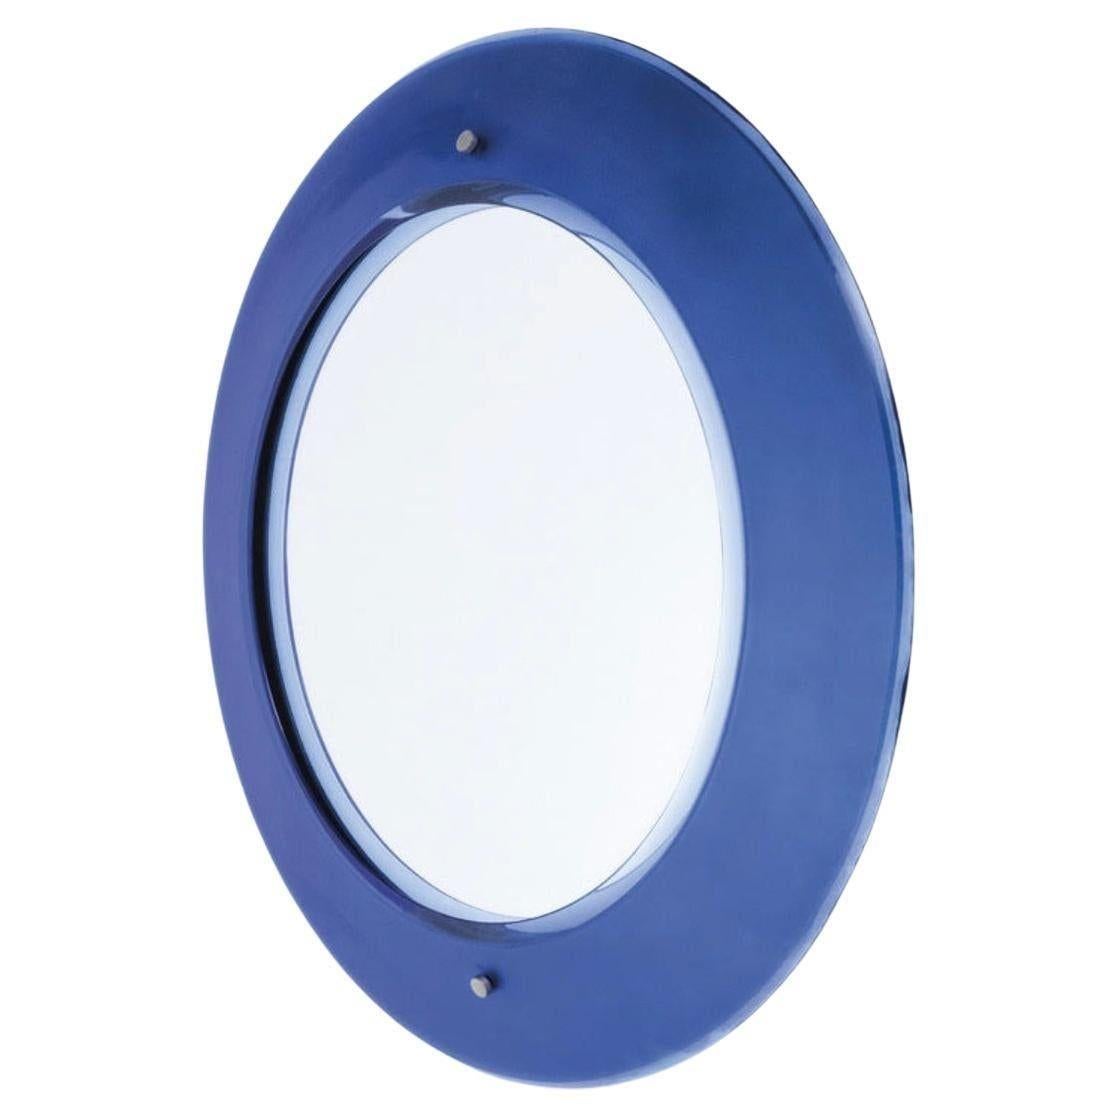 Vintage round mirror with a bevel deep cobalt blue Murano glass frame and mirrored center. It includes a wooden structure and has nickel-plated brass details. Produced by Fontana Arte, designed by Max Ingrand, Italy, c. 1960's.
*Information on